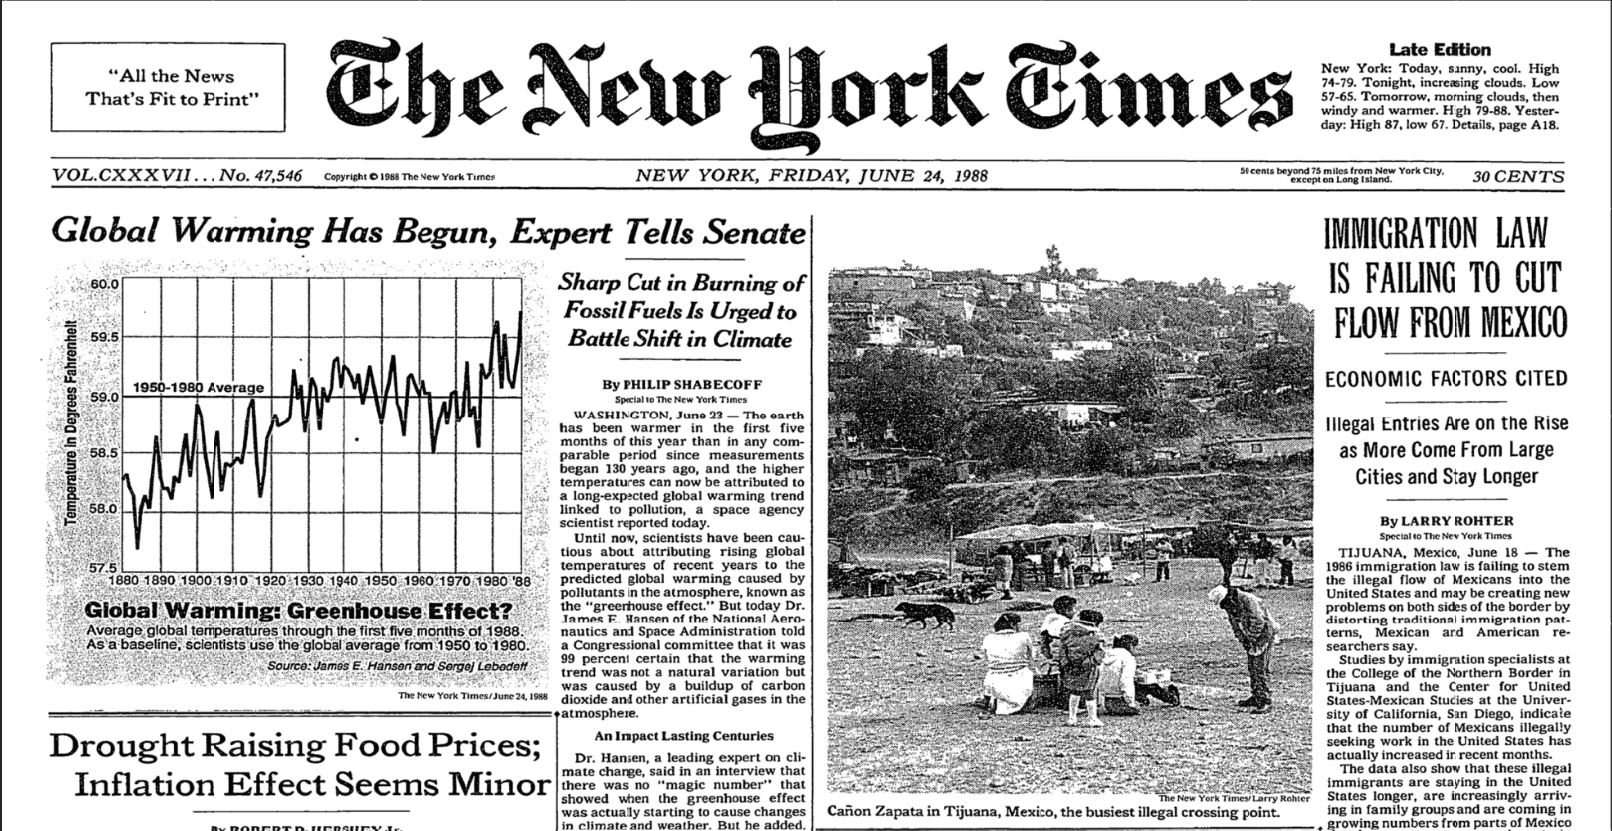 Front page of the New York Times from June 24, 1988 with "Global Warming Has Begun, Expert Tells Senate" printed in the top left corner.